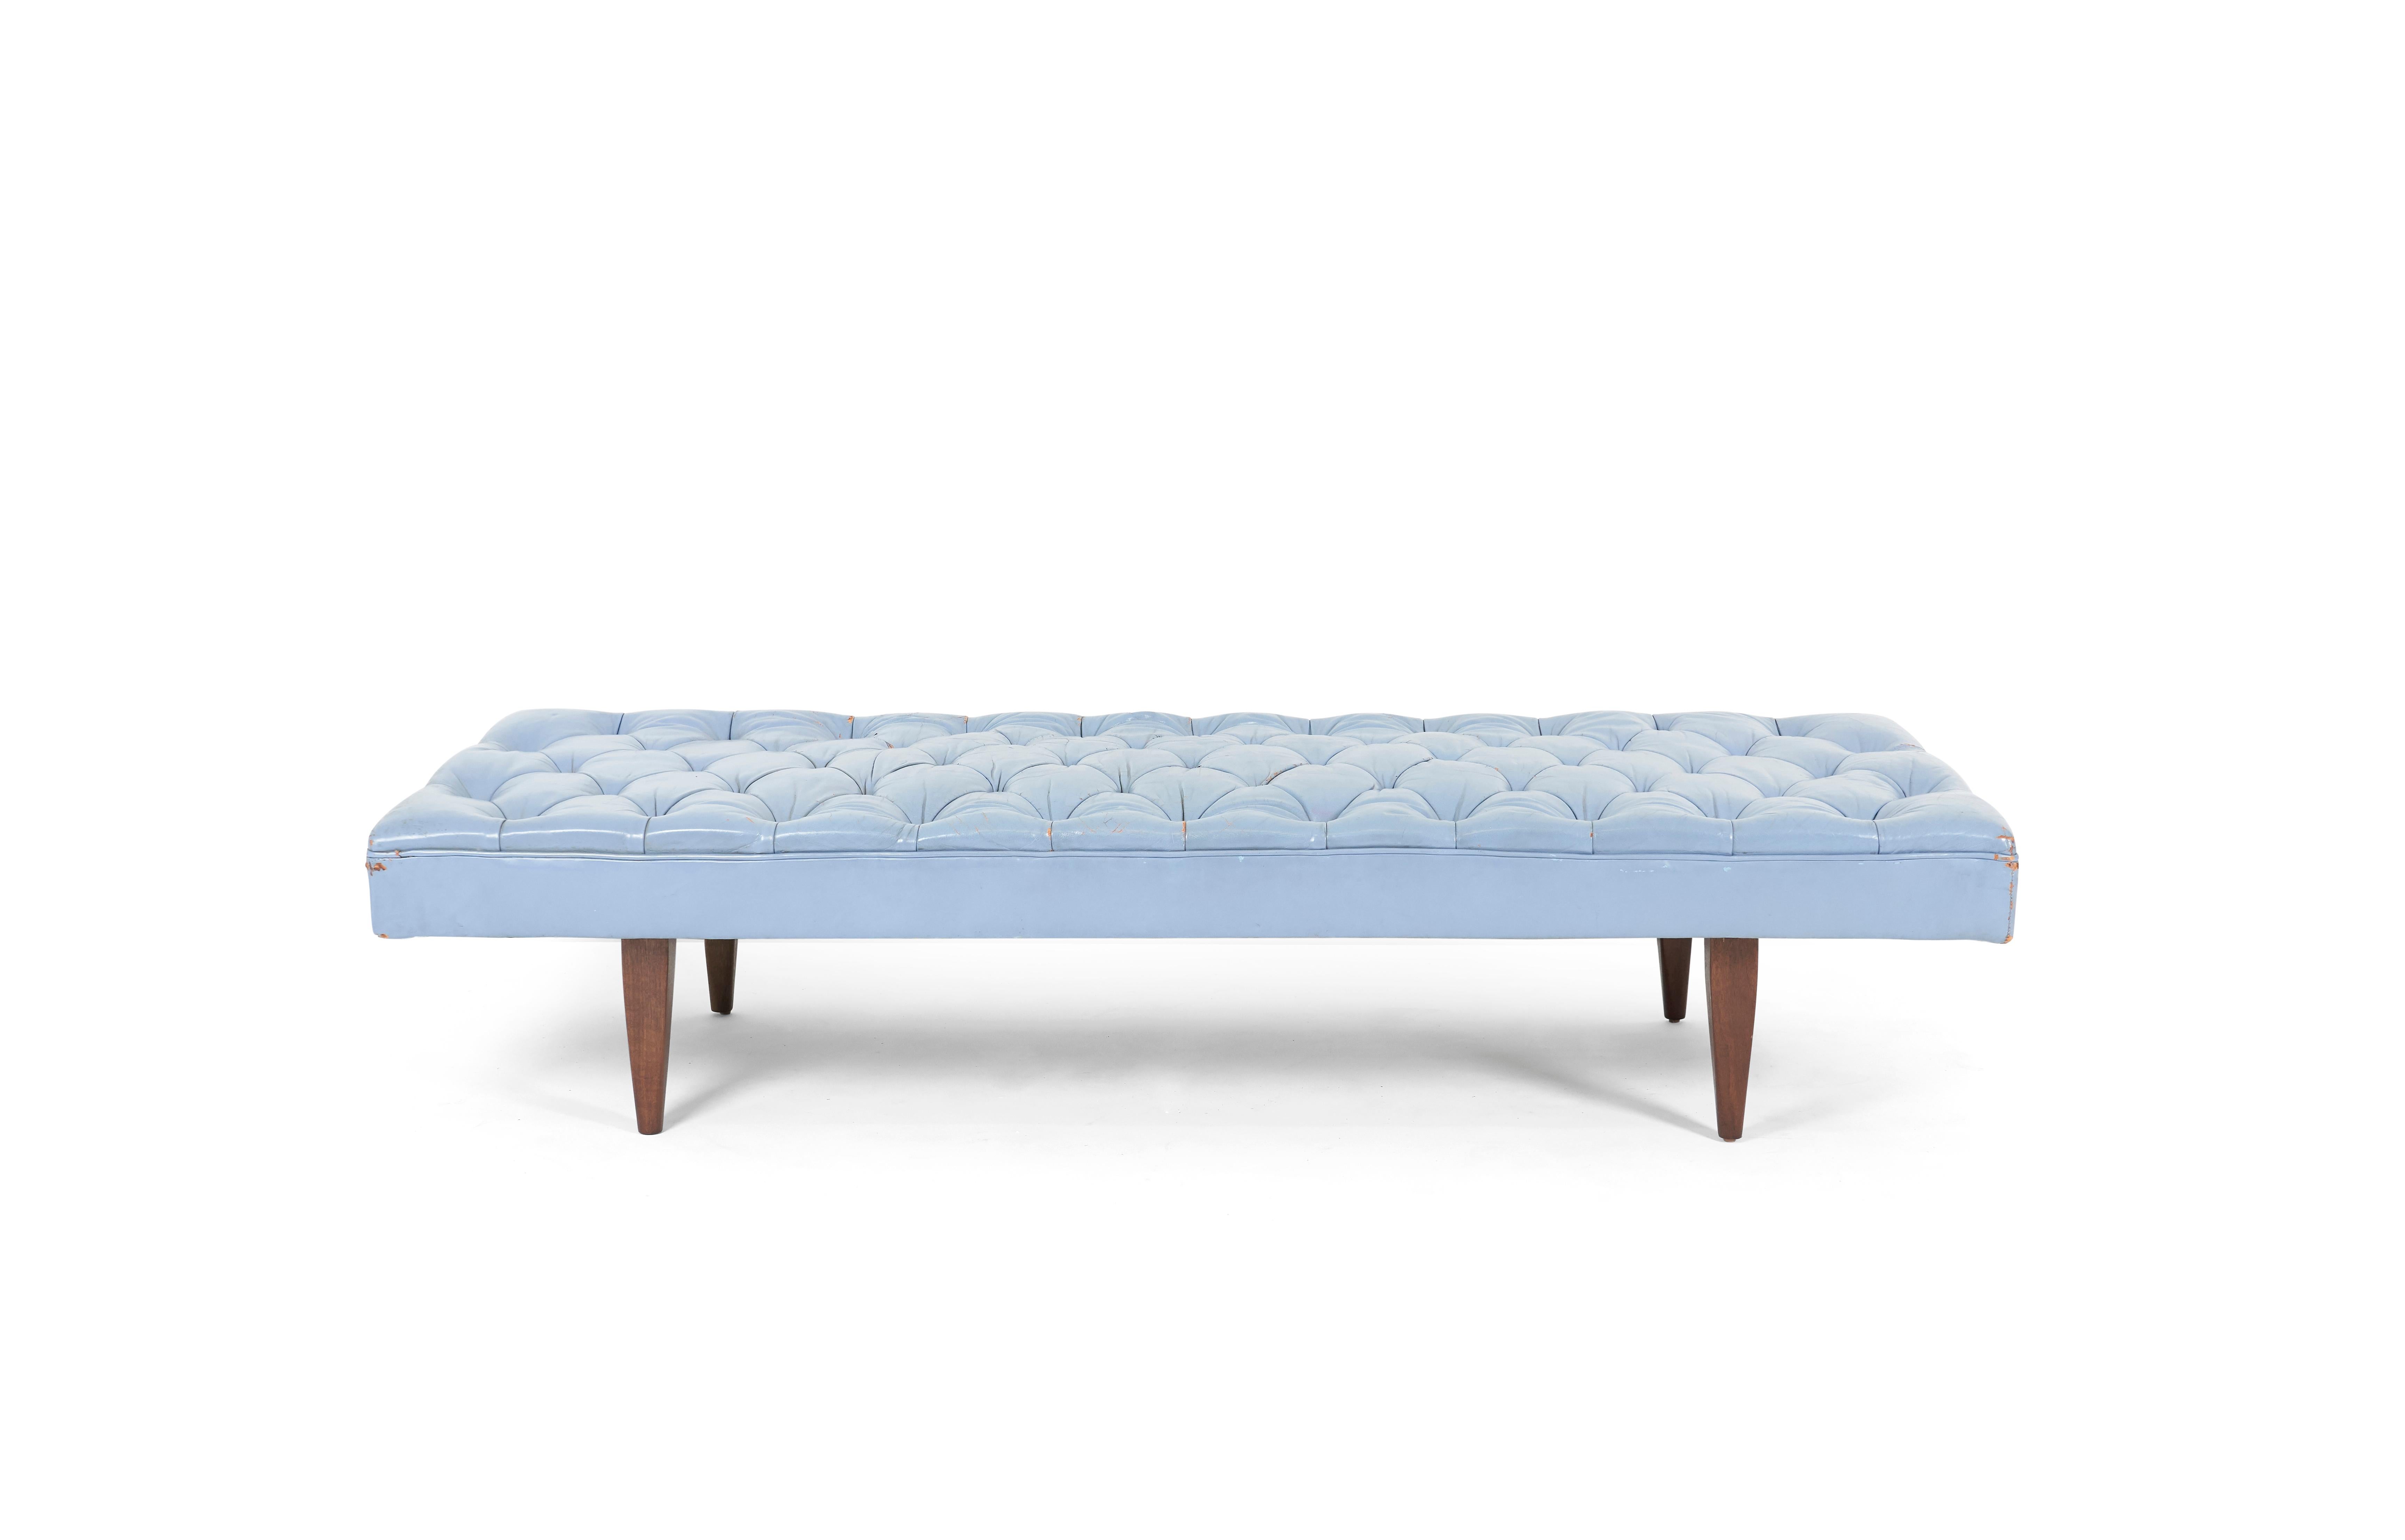 Chesterfield tufted daybed bench. Designed by Kipp Stewart for Calvin Furniture. Original tufted blue leather has great broken-in patina. Walnut legs have been refinished, cushion support strapping replace.